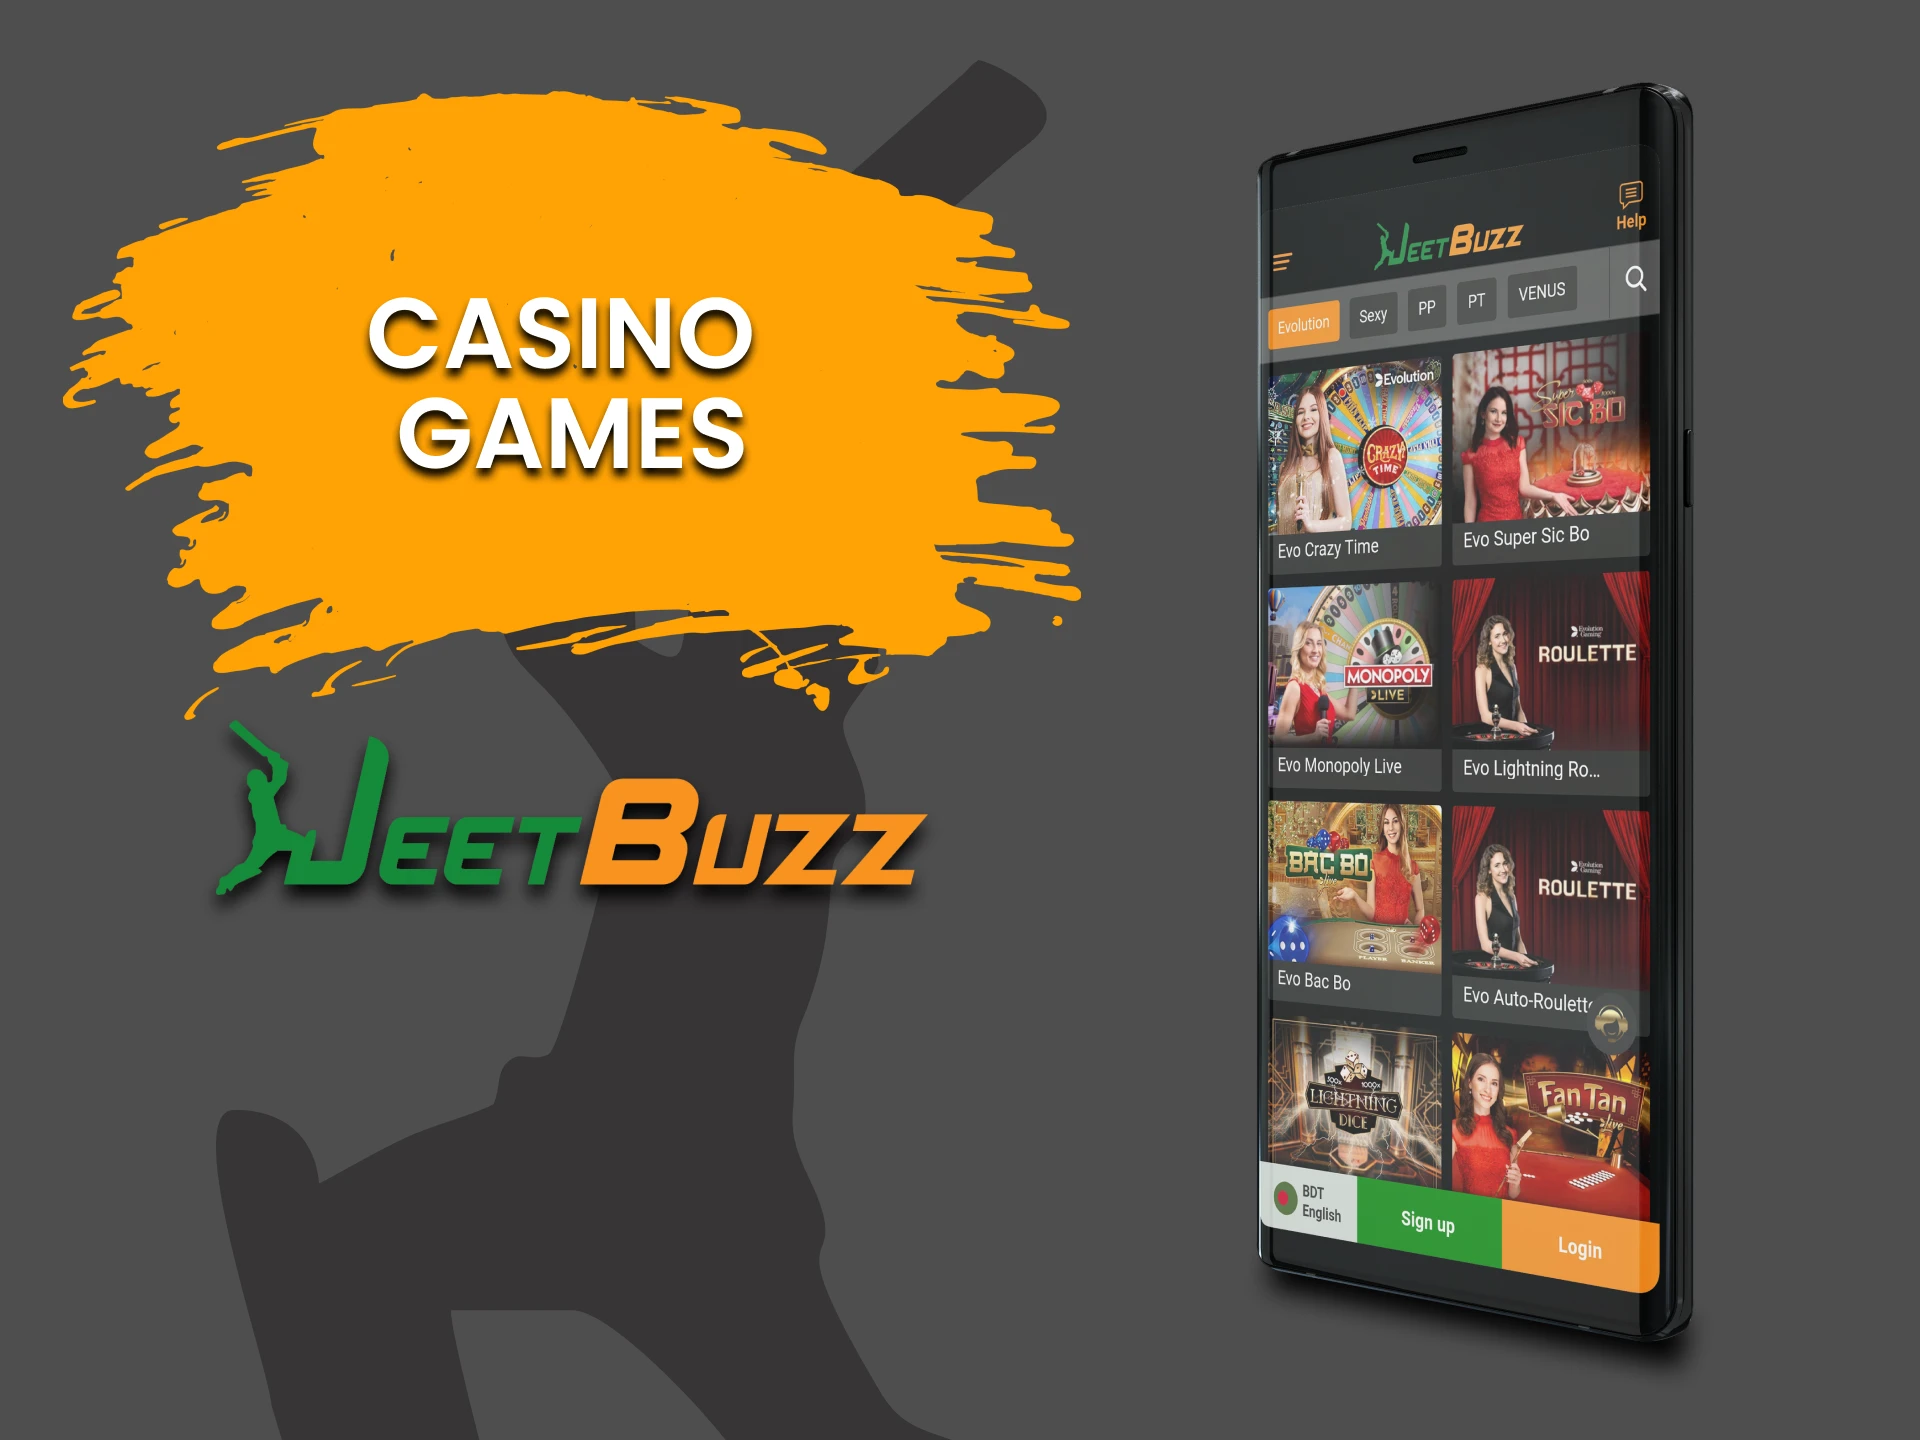 Choose casino games from the JeetBuzz app.